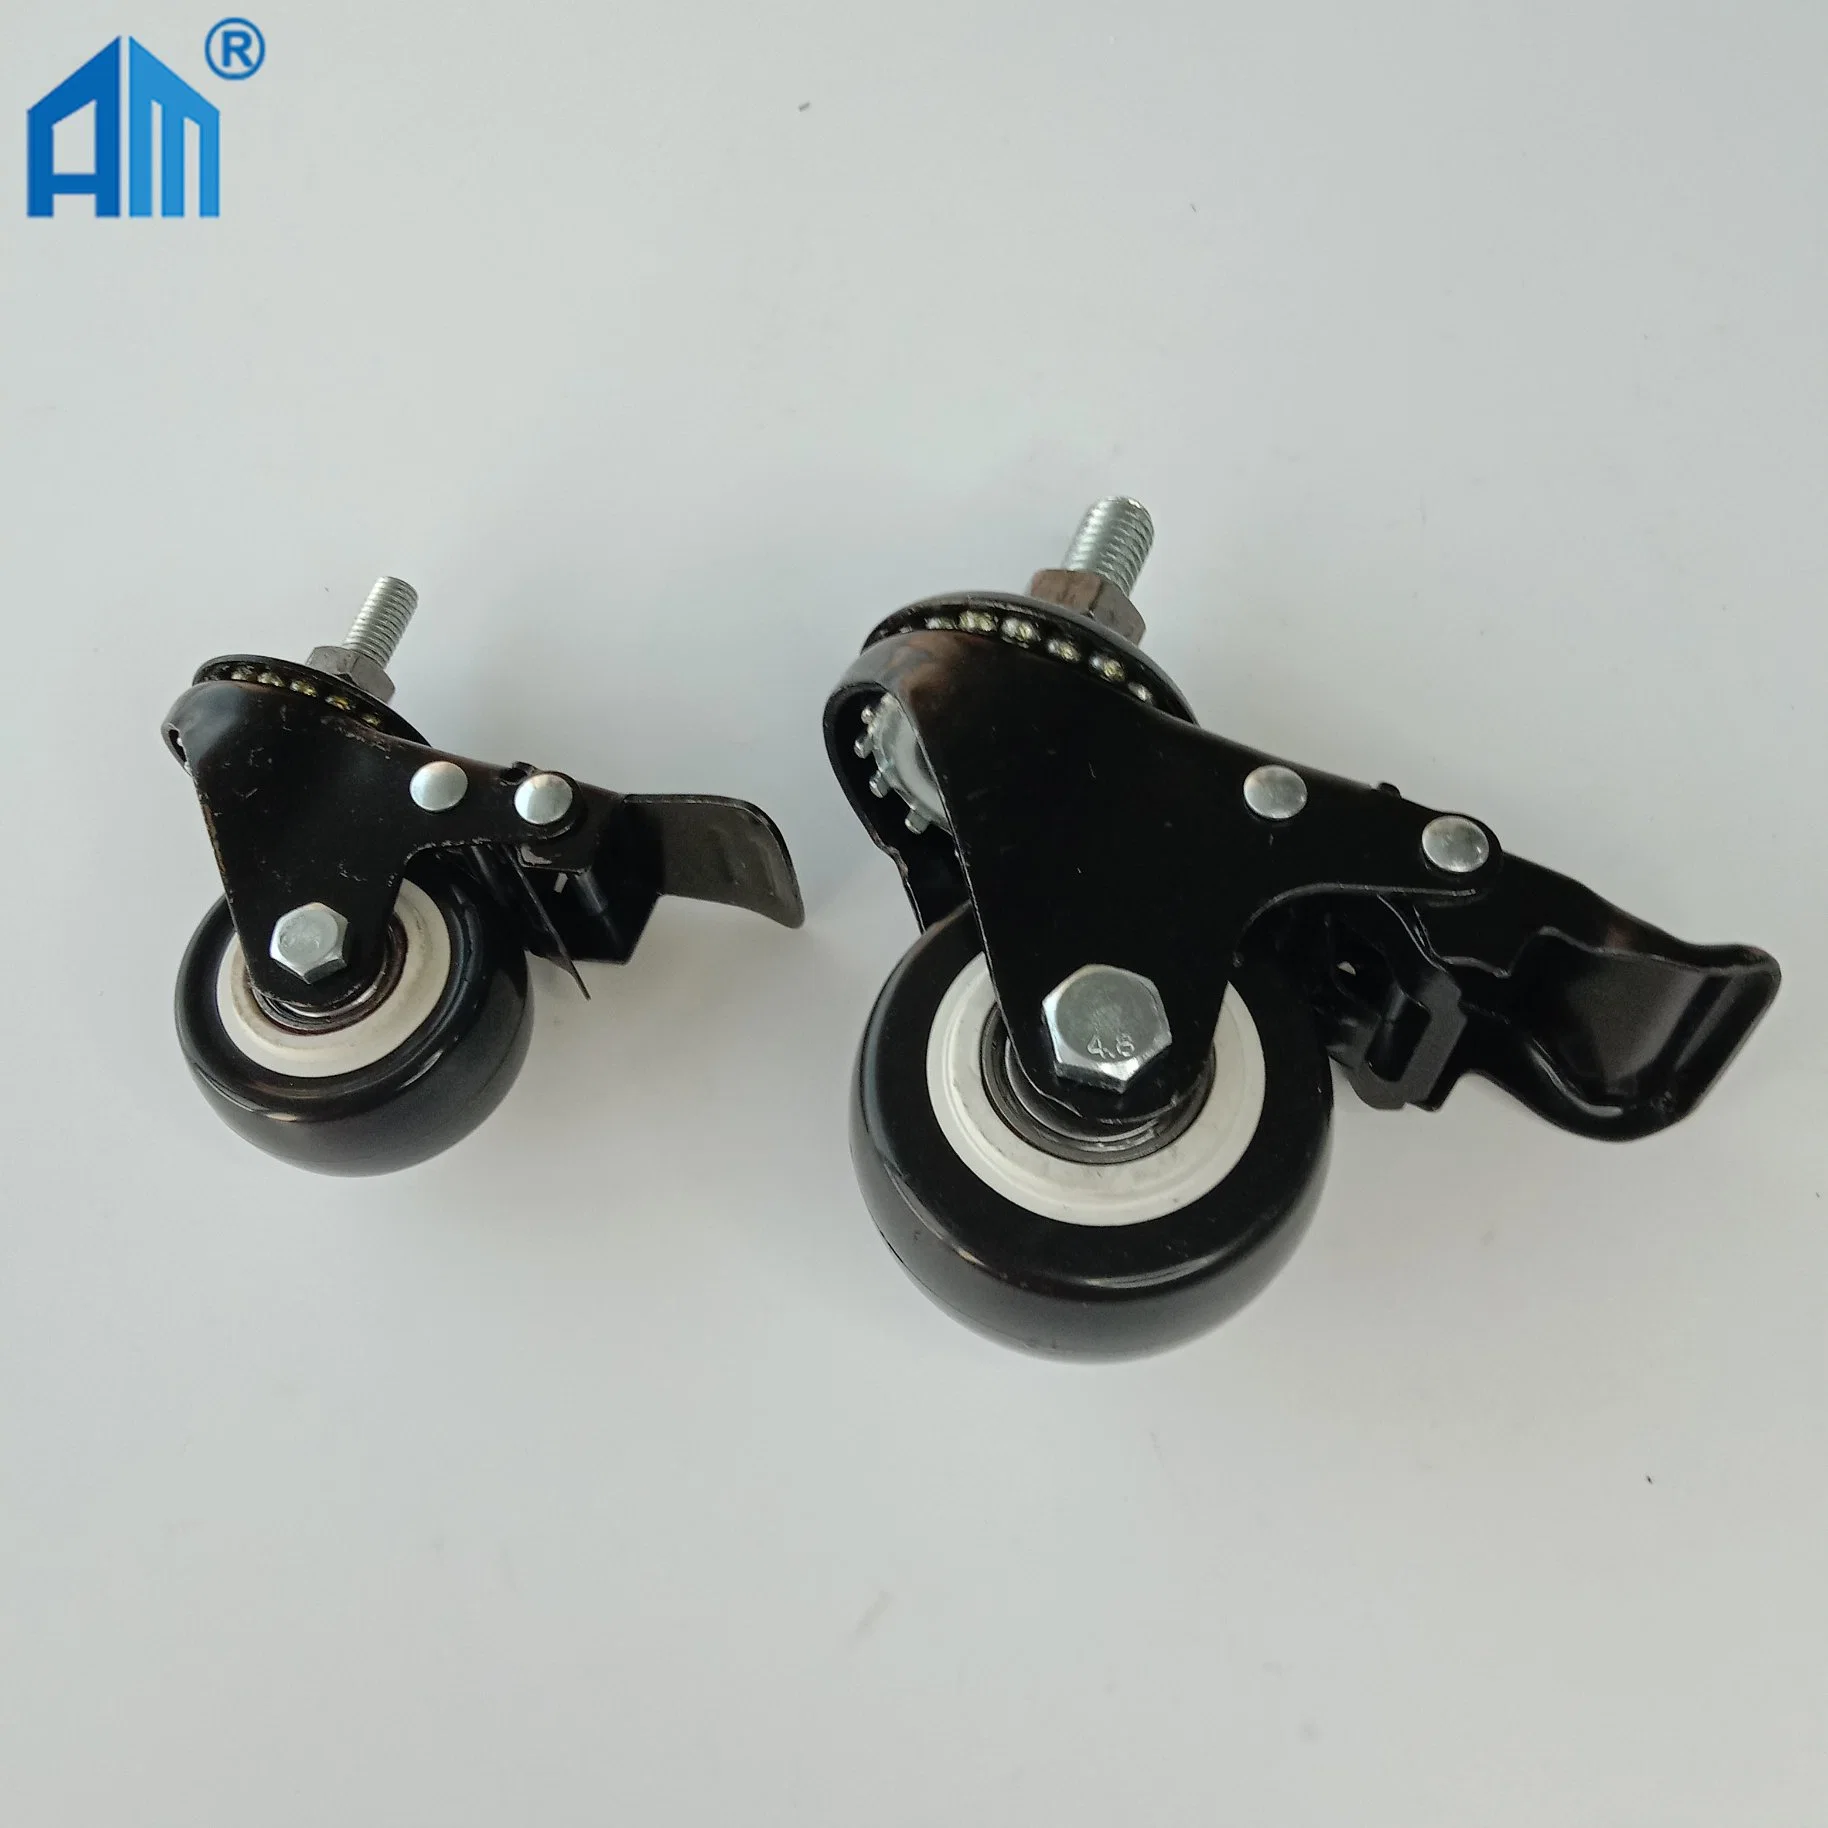 Furniture Casters 2 Inch Office Chair Casters Wheel Universal Swivel Caster Wheels